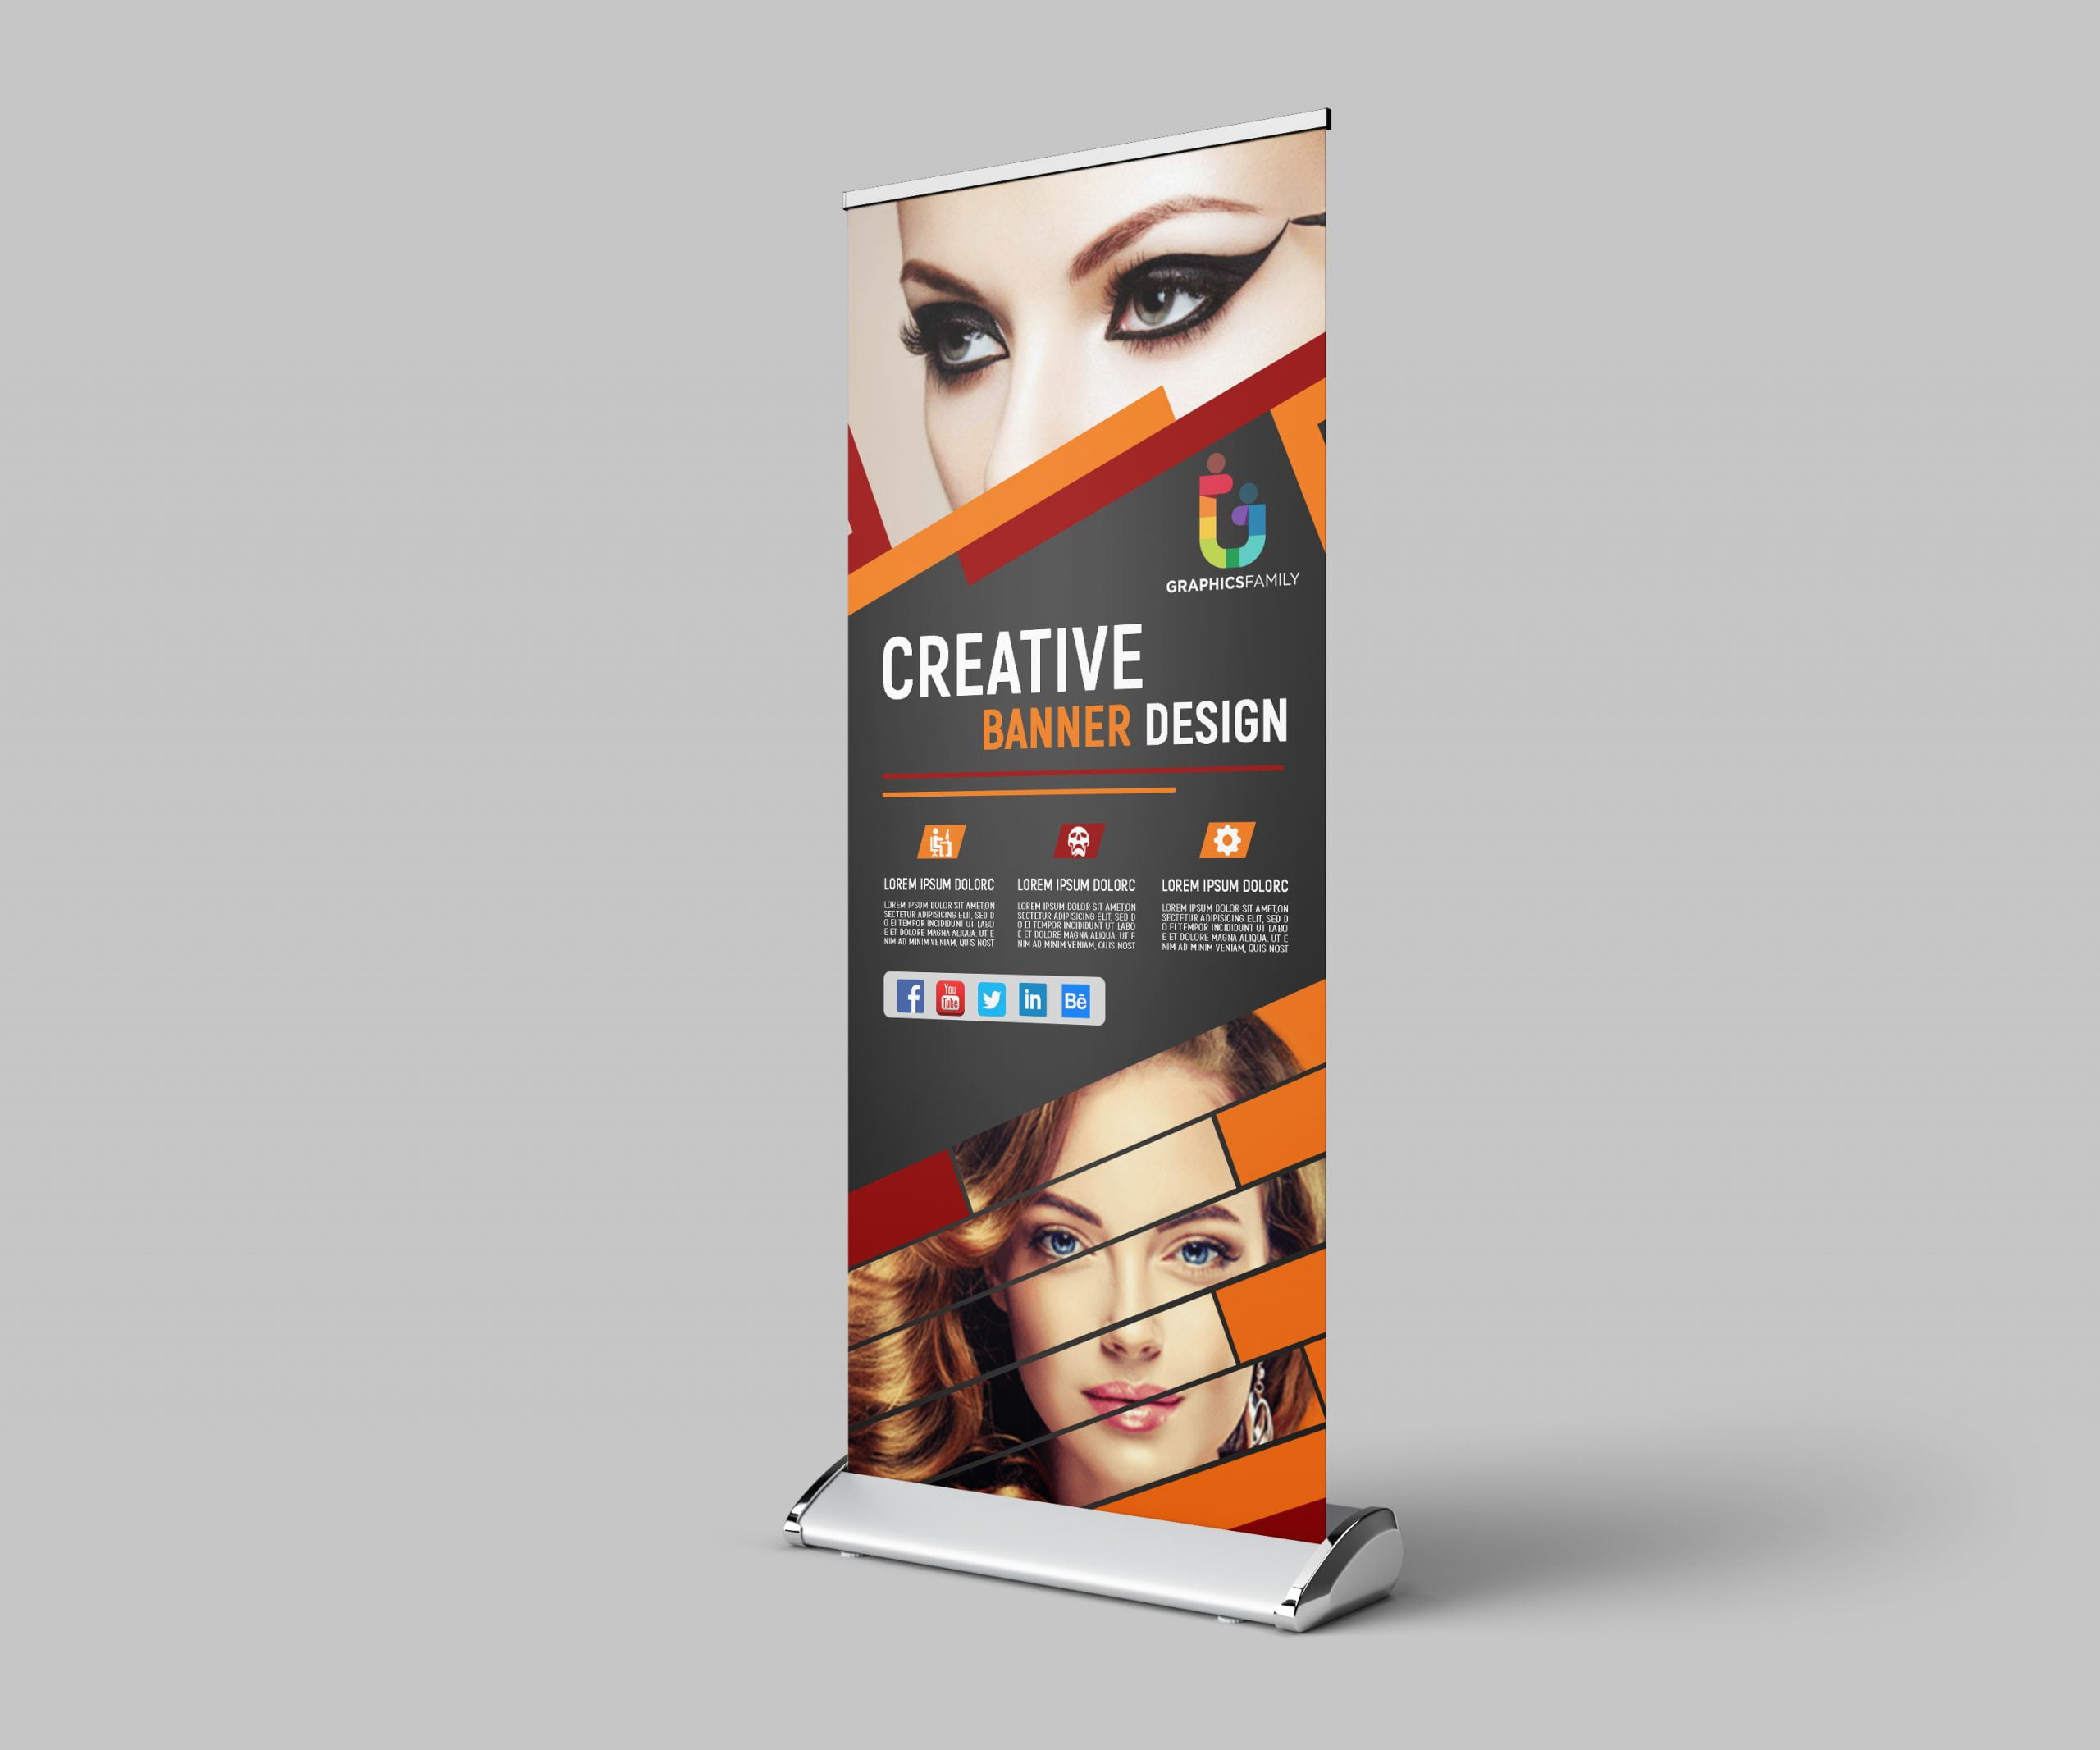 Beauty parlor Roll up banner template